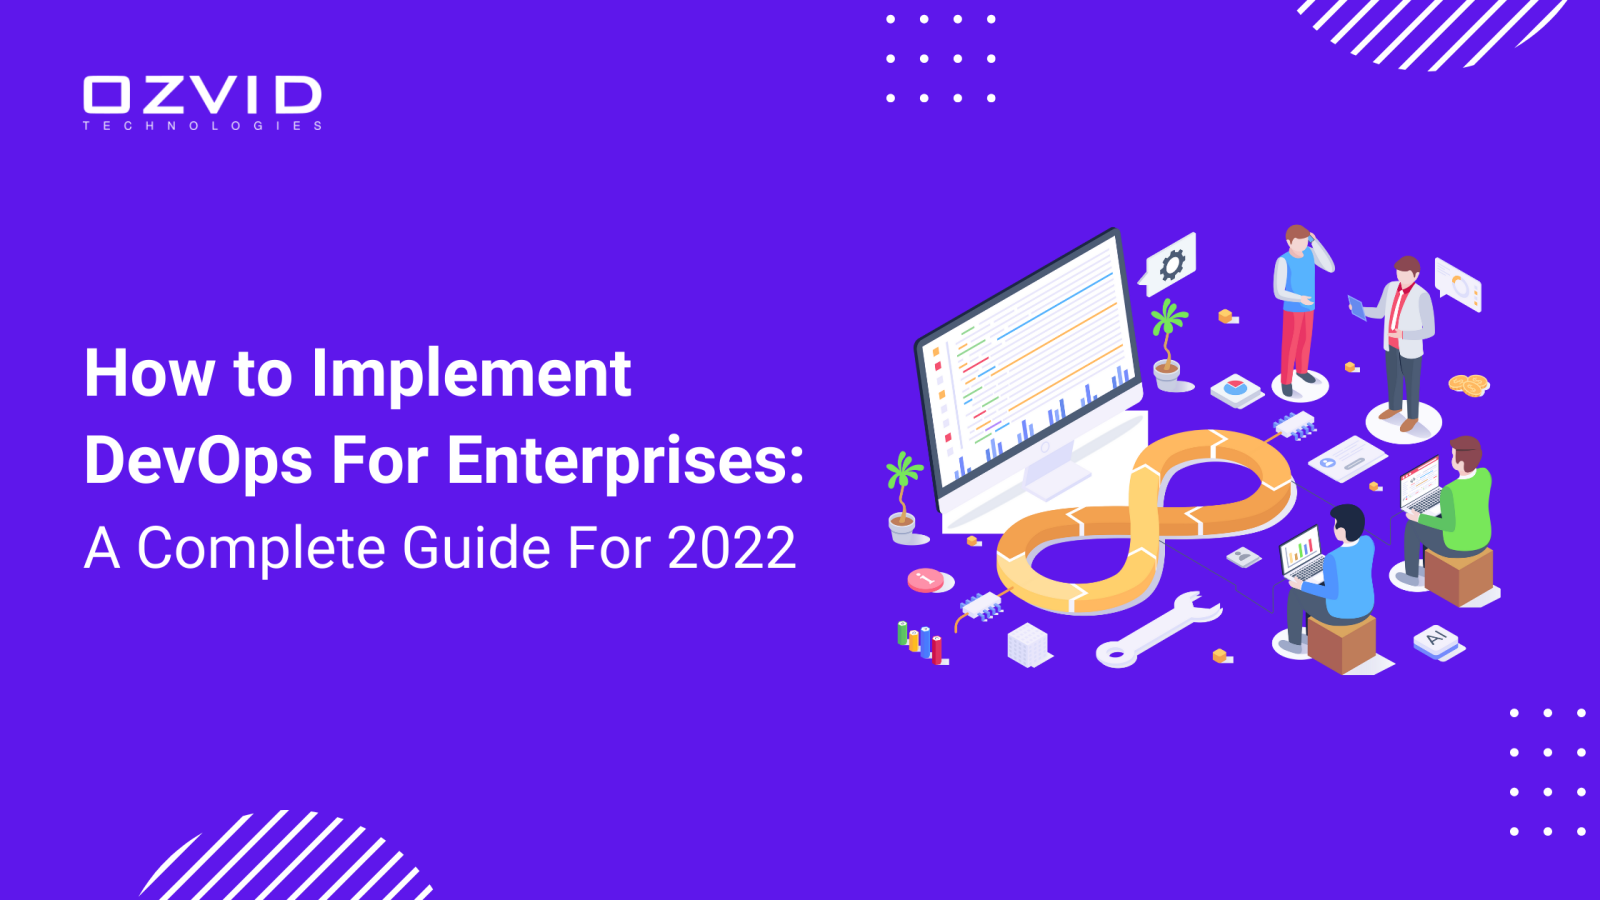 How To Implement DevOps For Enterprises: A Complete Guide For 2022